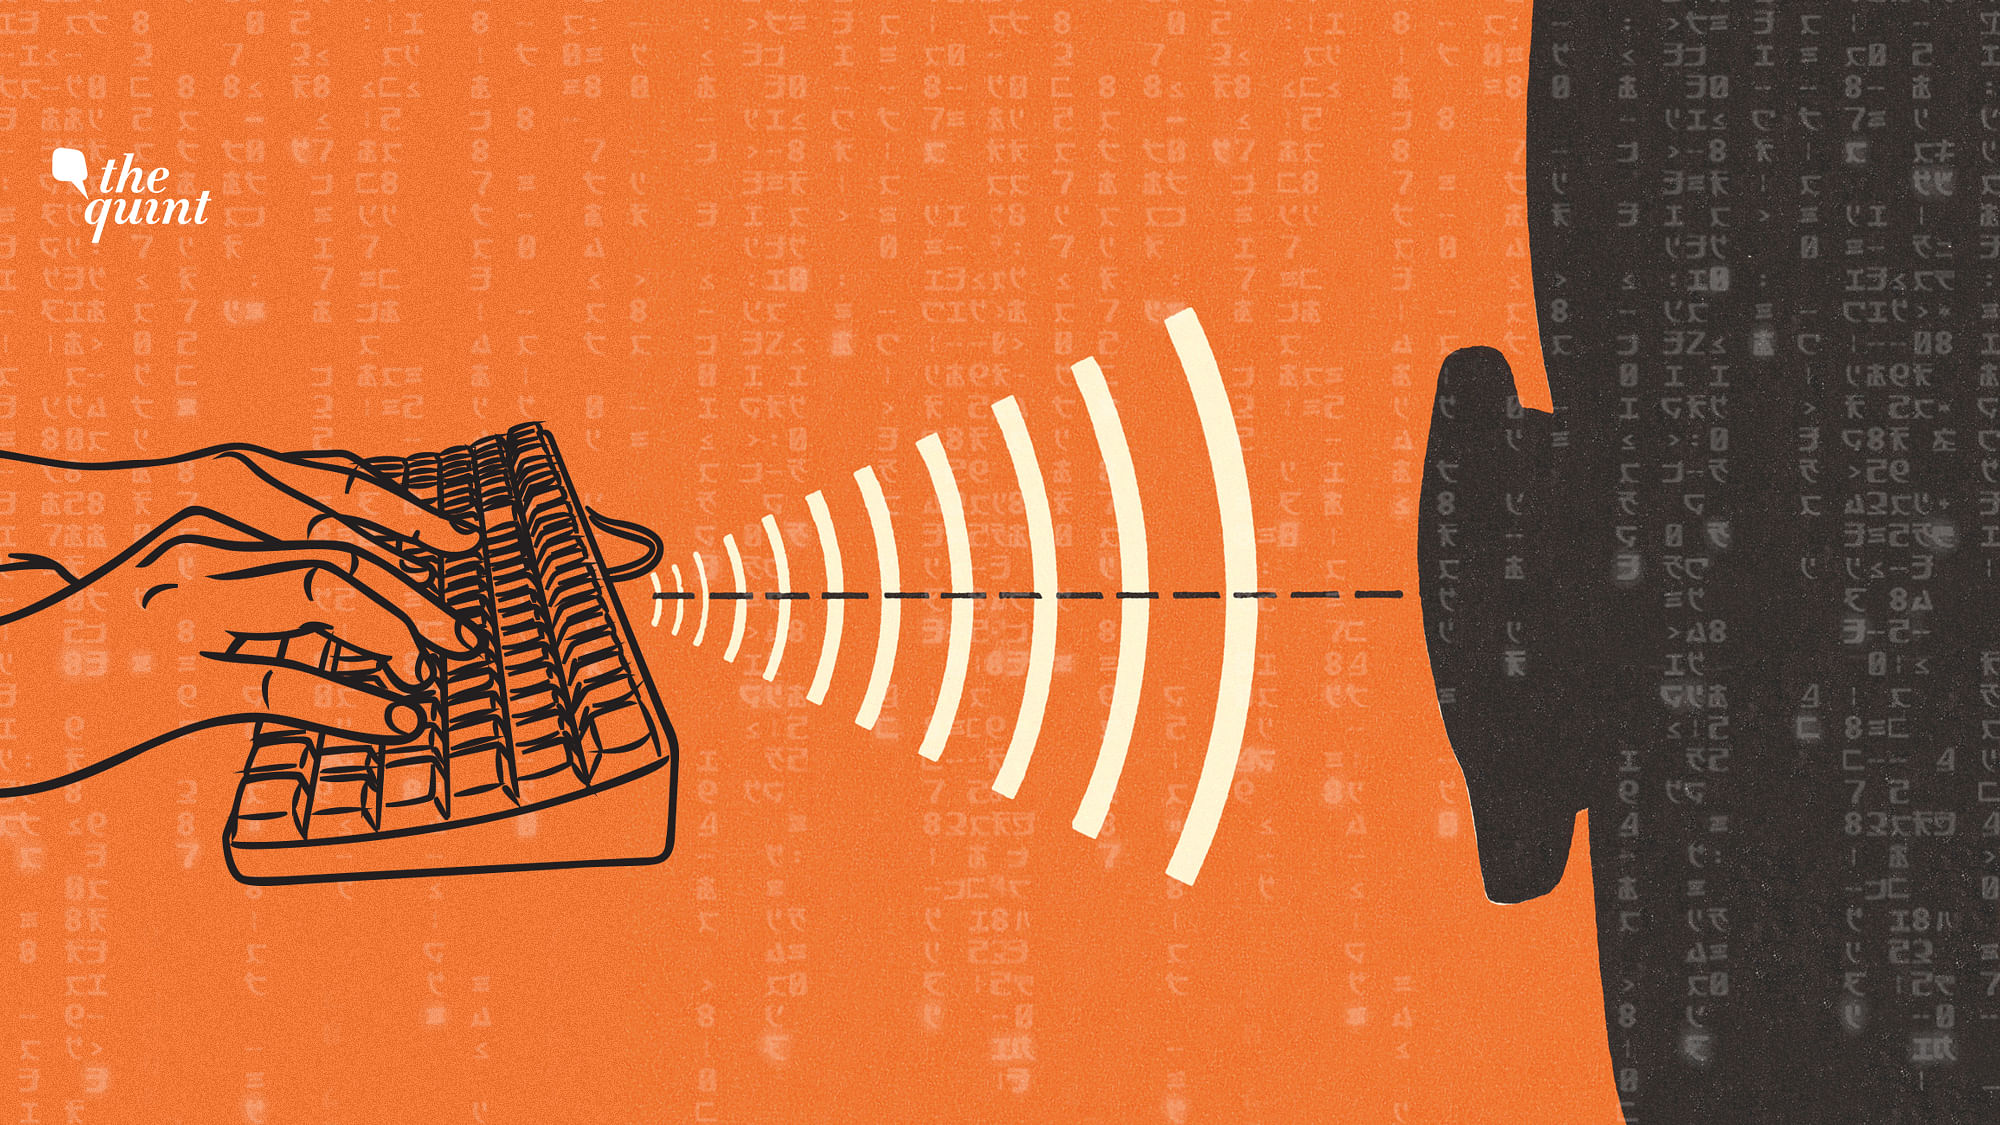 Hackers can listen to keystrokes and figure out text with 41 percent accuracy.